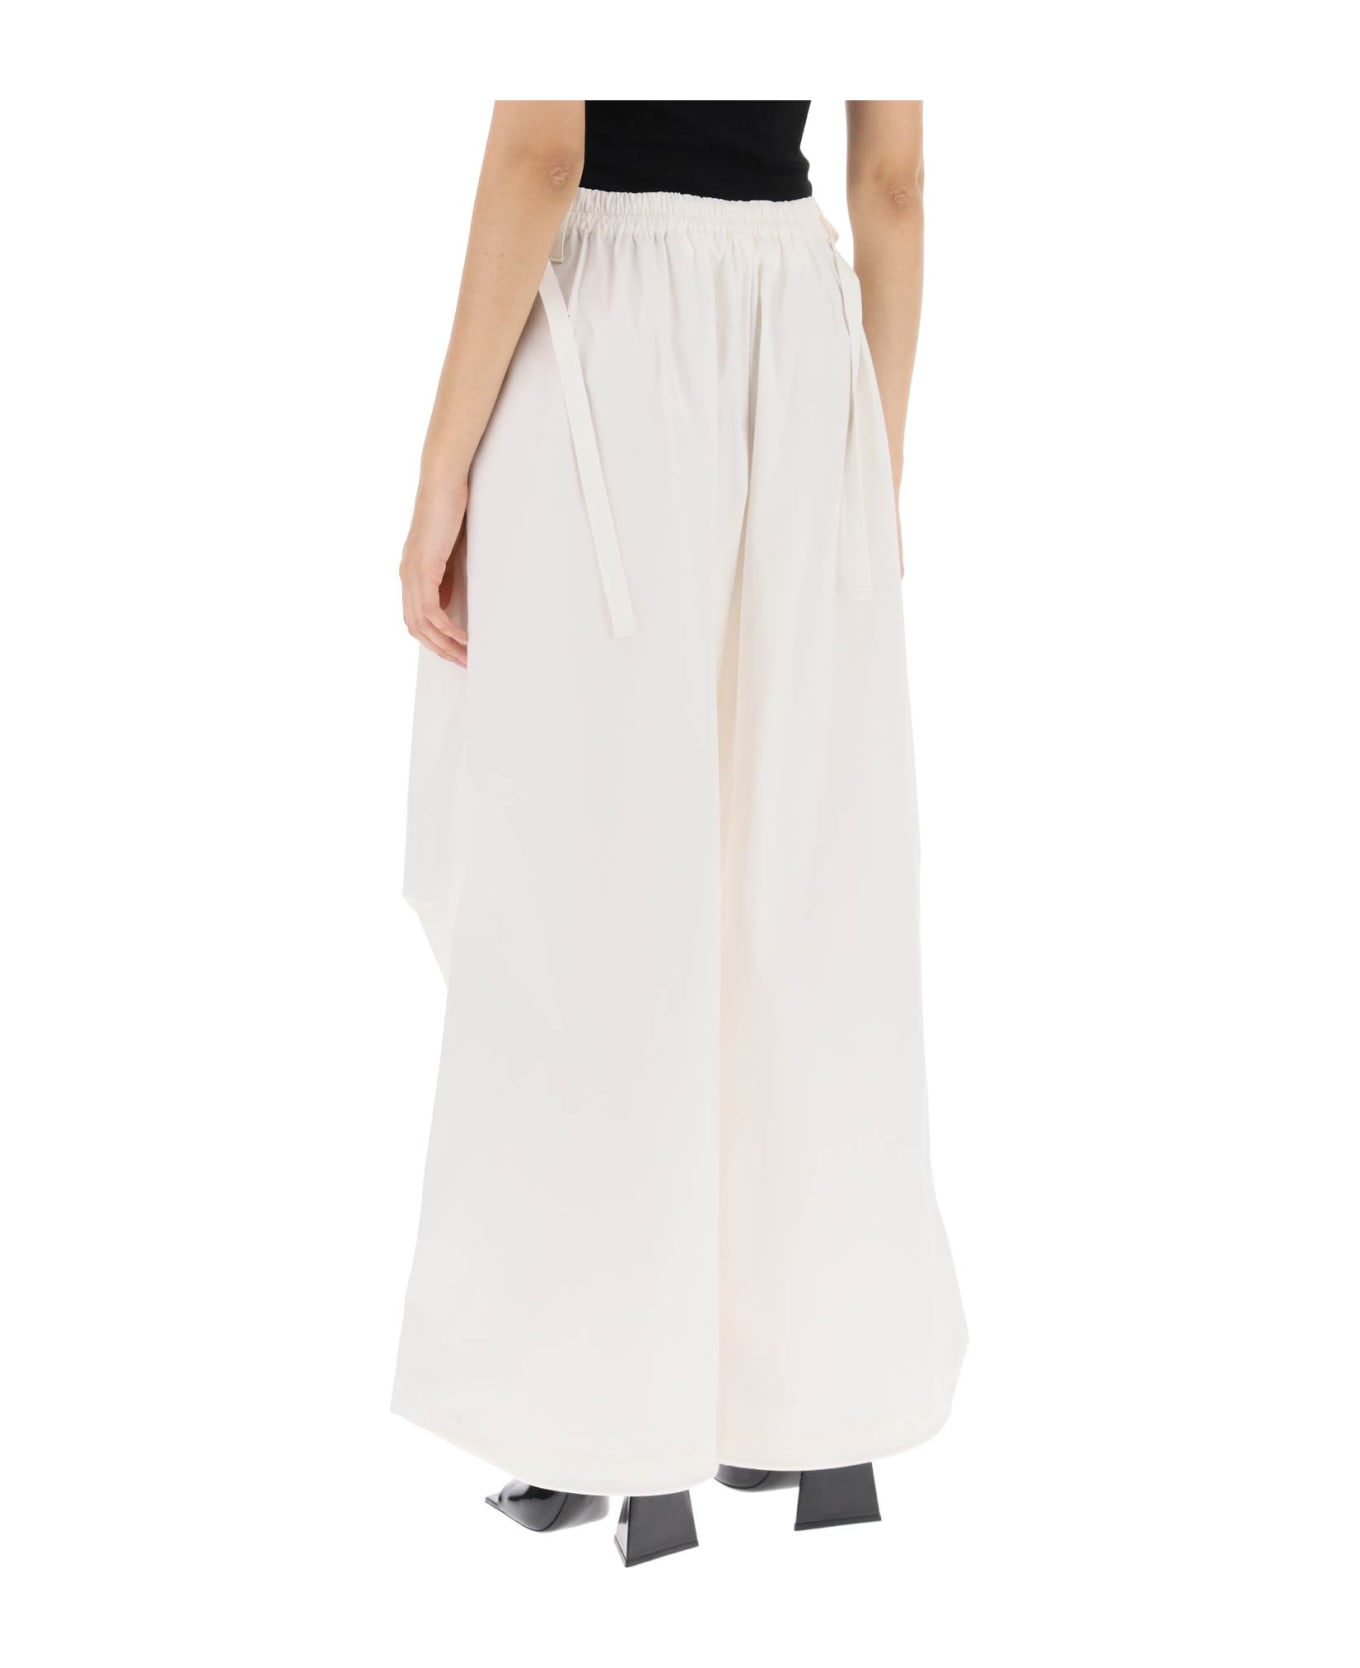 Dion Lee Oversized Parachute Pants - IVORY (White) ボトムス